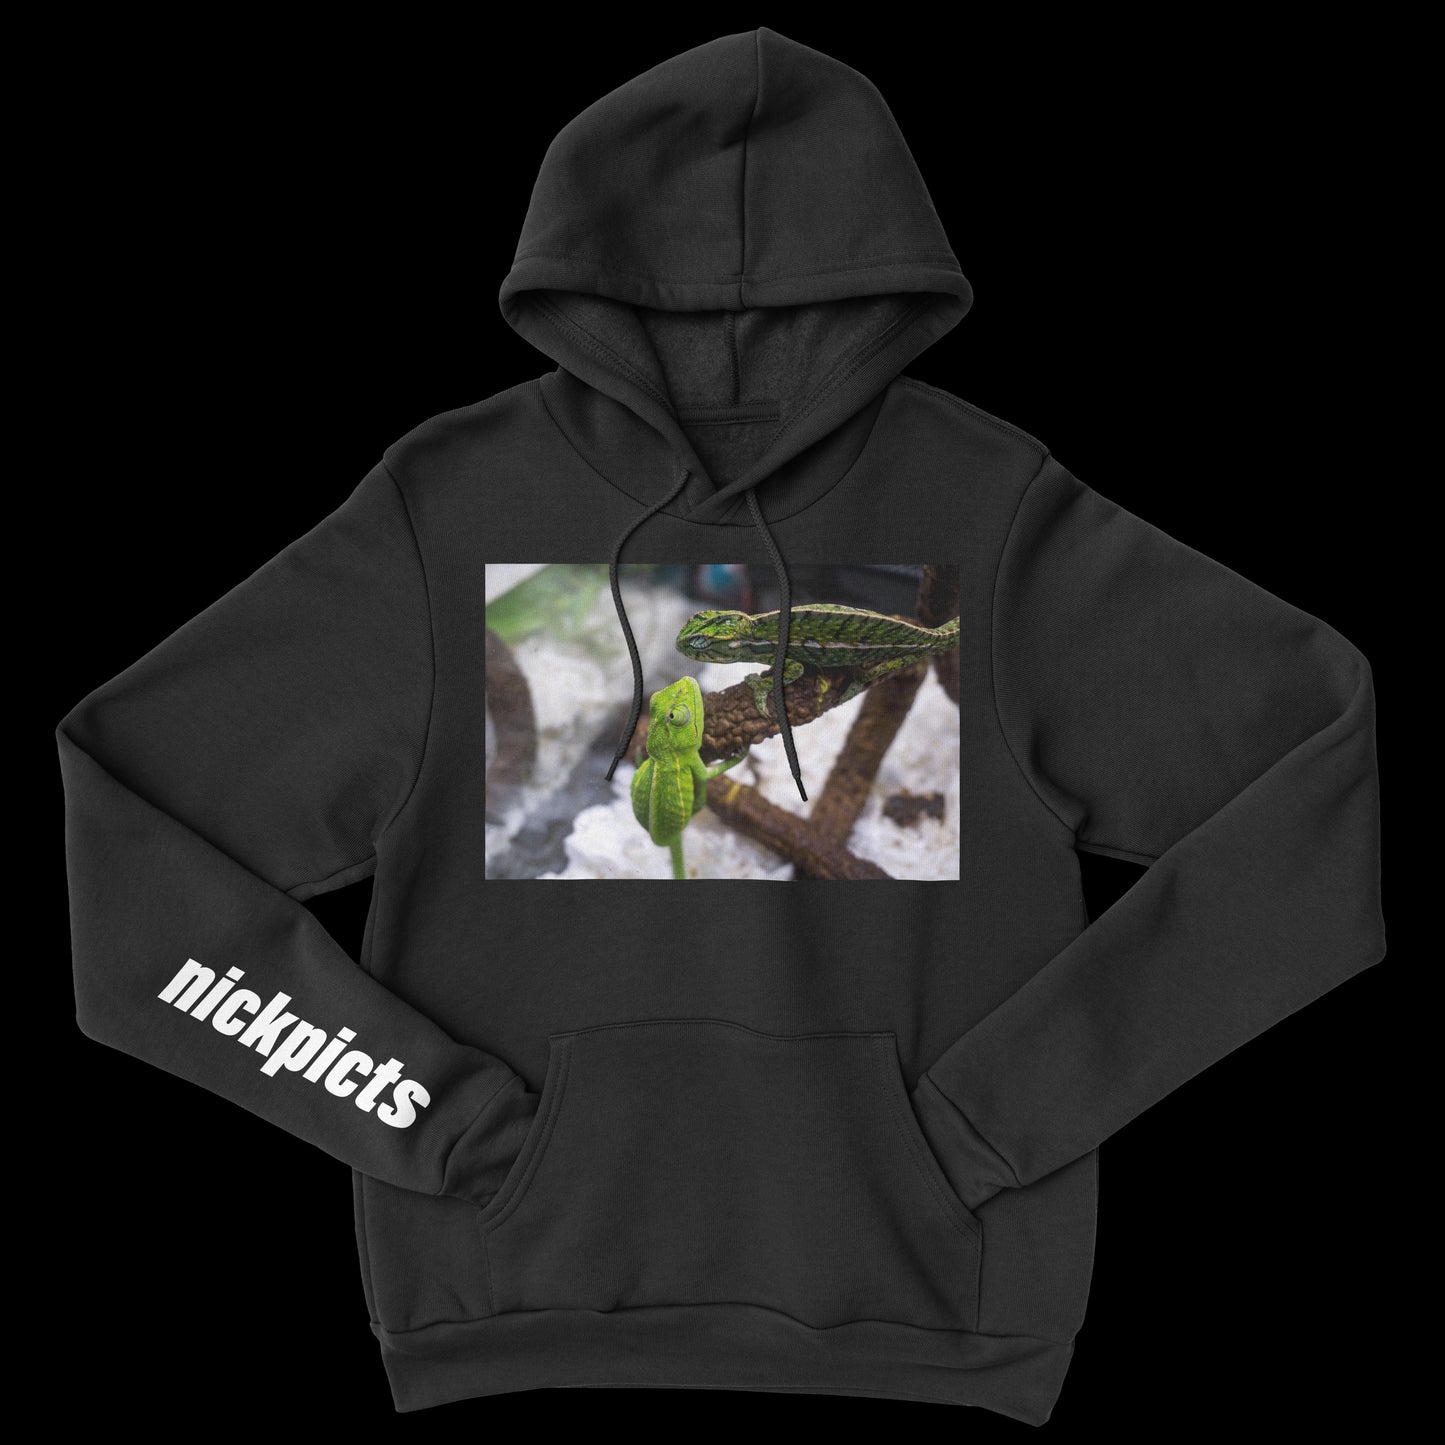 Copy of Nick Picts "Toad" Local Photography Hoodie